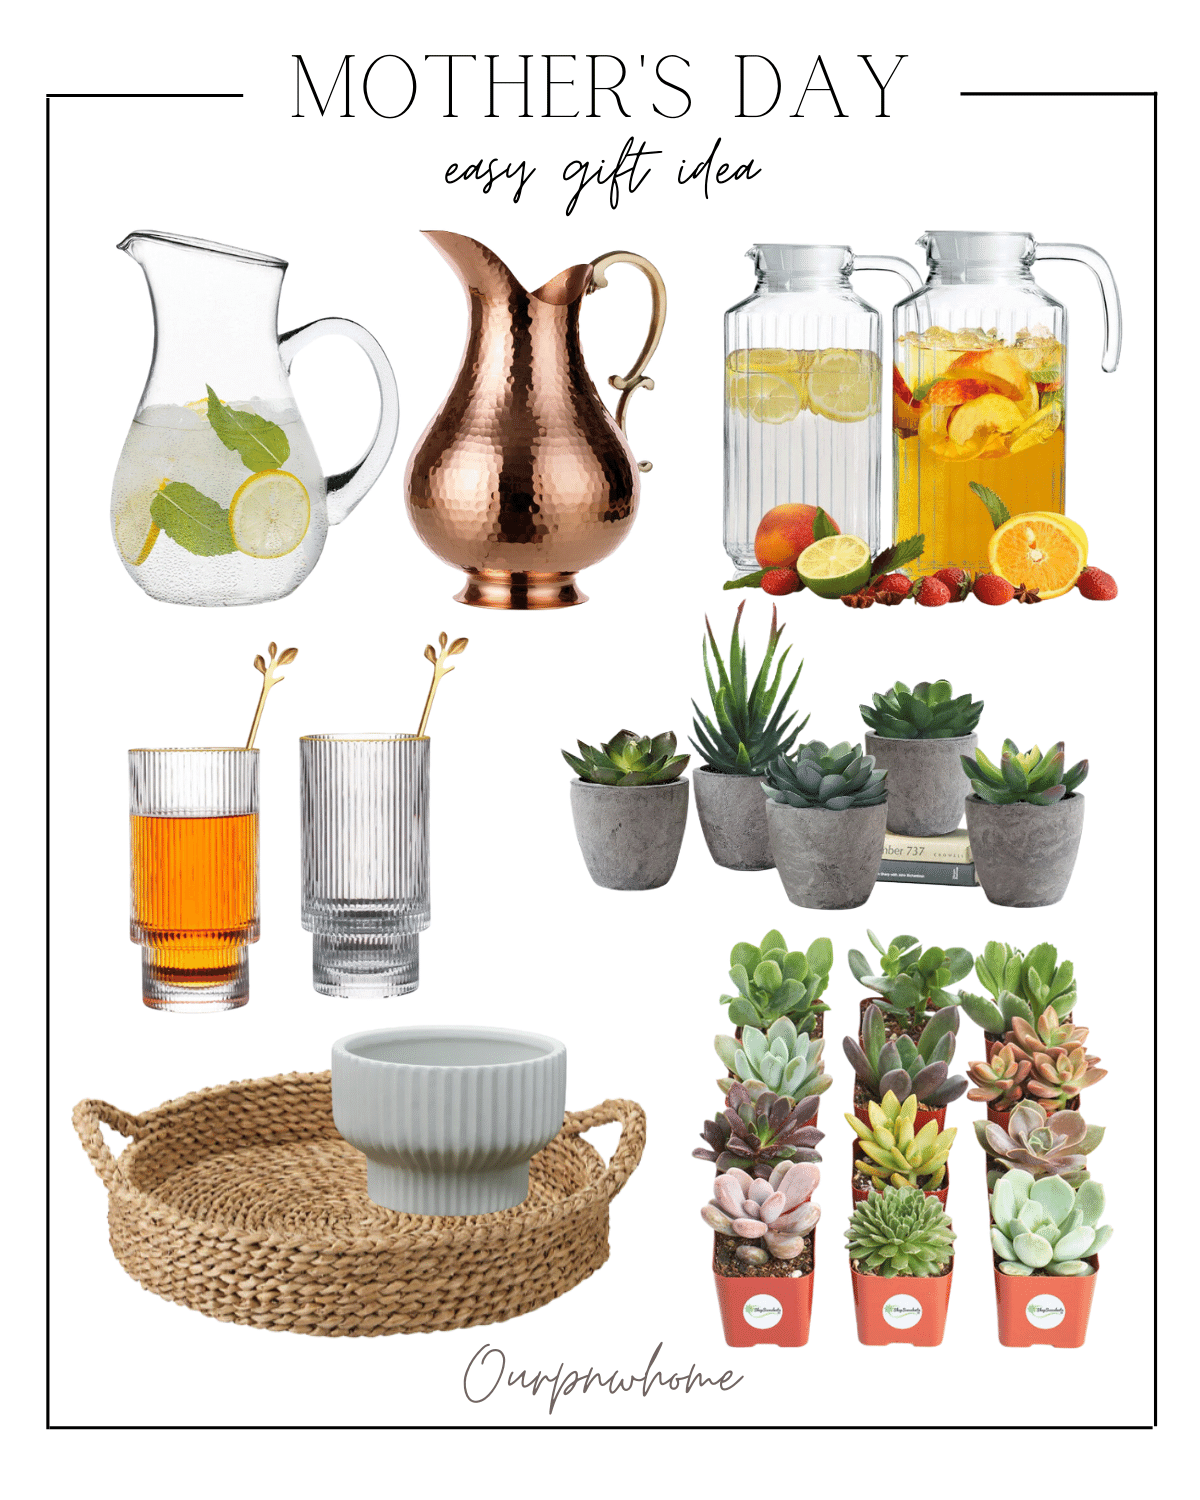 mother's day gift ideas, glass pitchers, copper pitcher, glass cups, succulents, tray, succulent pot, DIY mother's day gifts, last minute gift ideas 